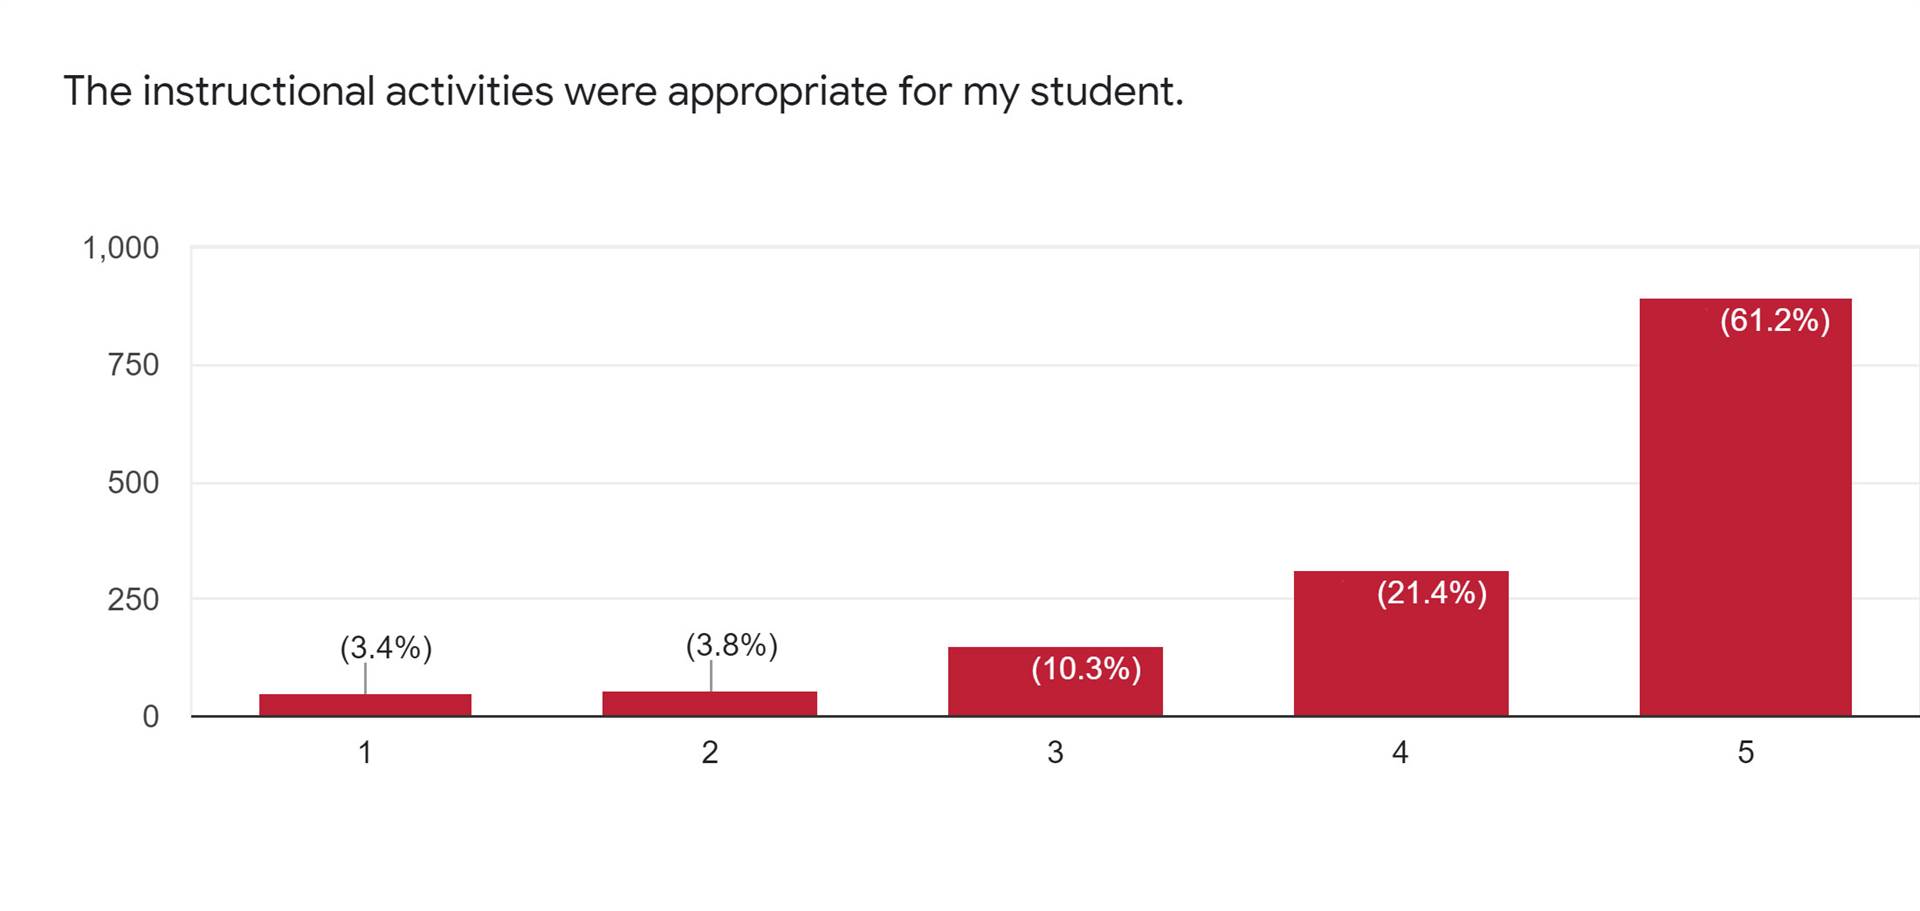 FID Survey Slide 5 - "The instructional activities were appropriate for my student" bar chart